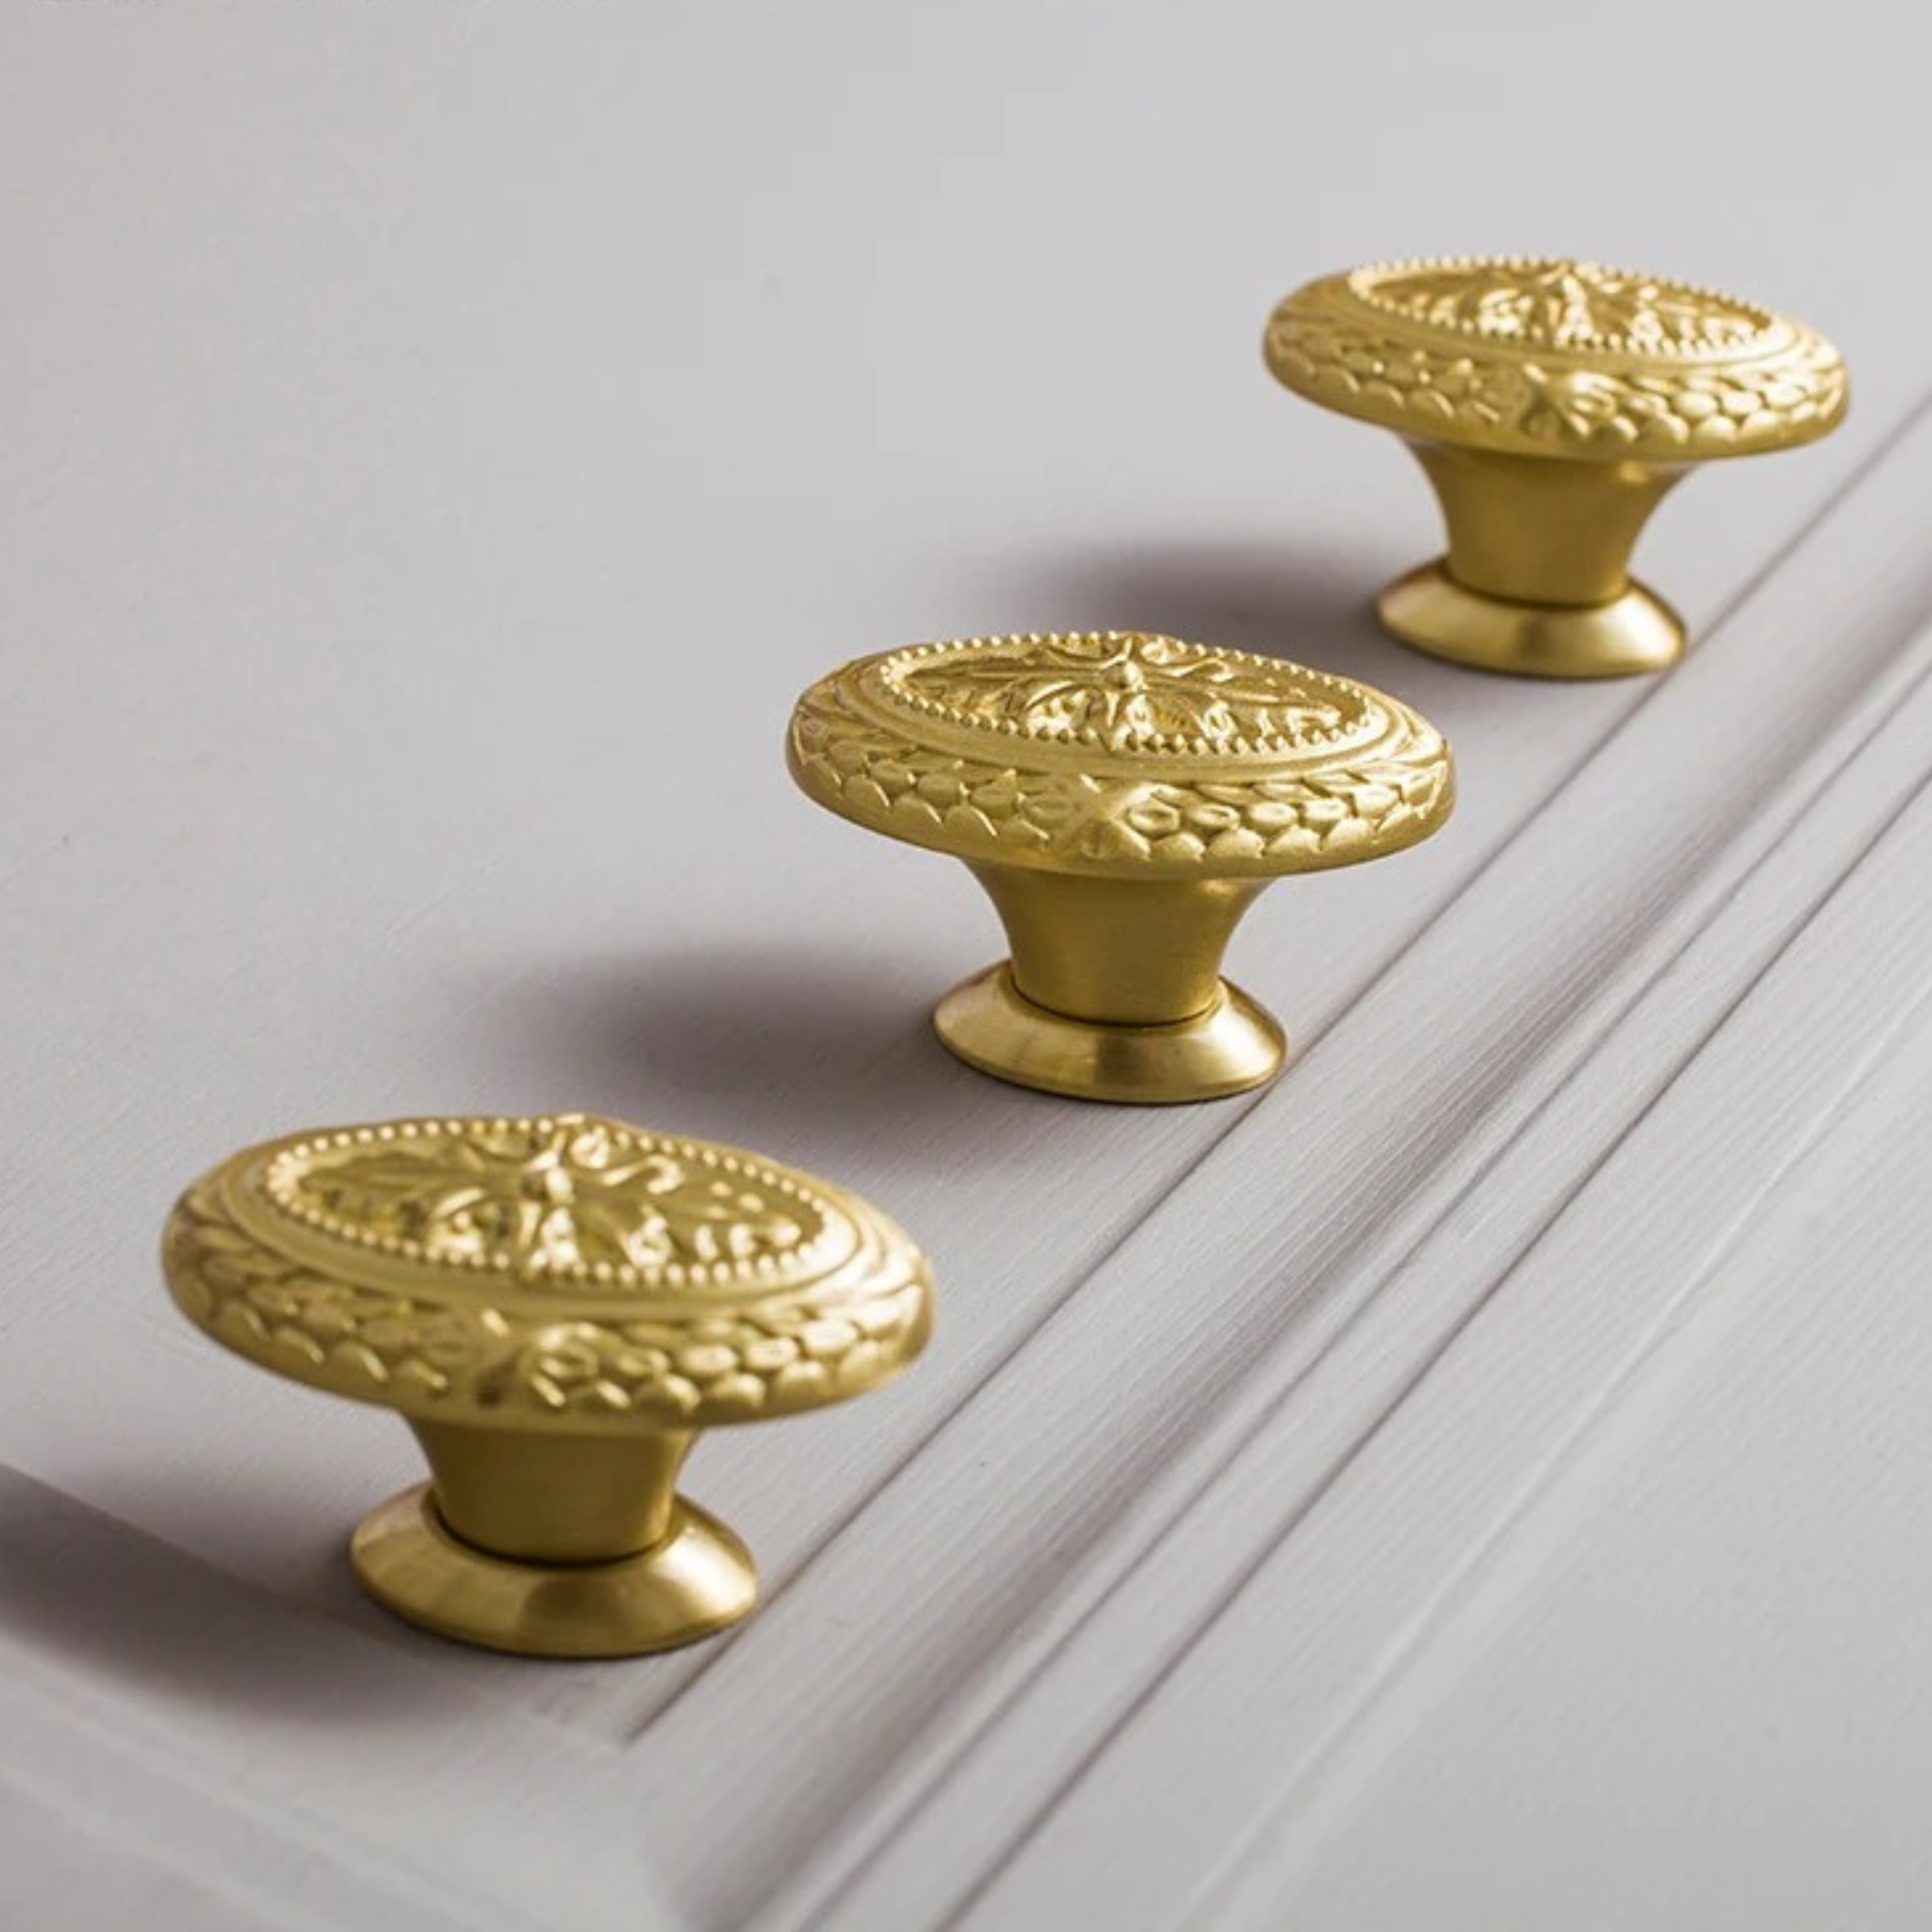 Victorian Inspired Drawer Knob | Forma